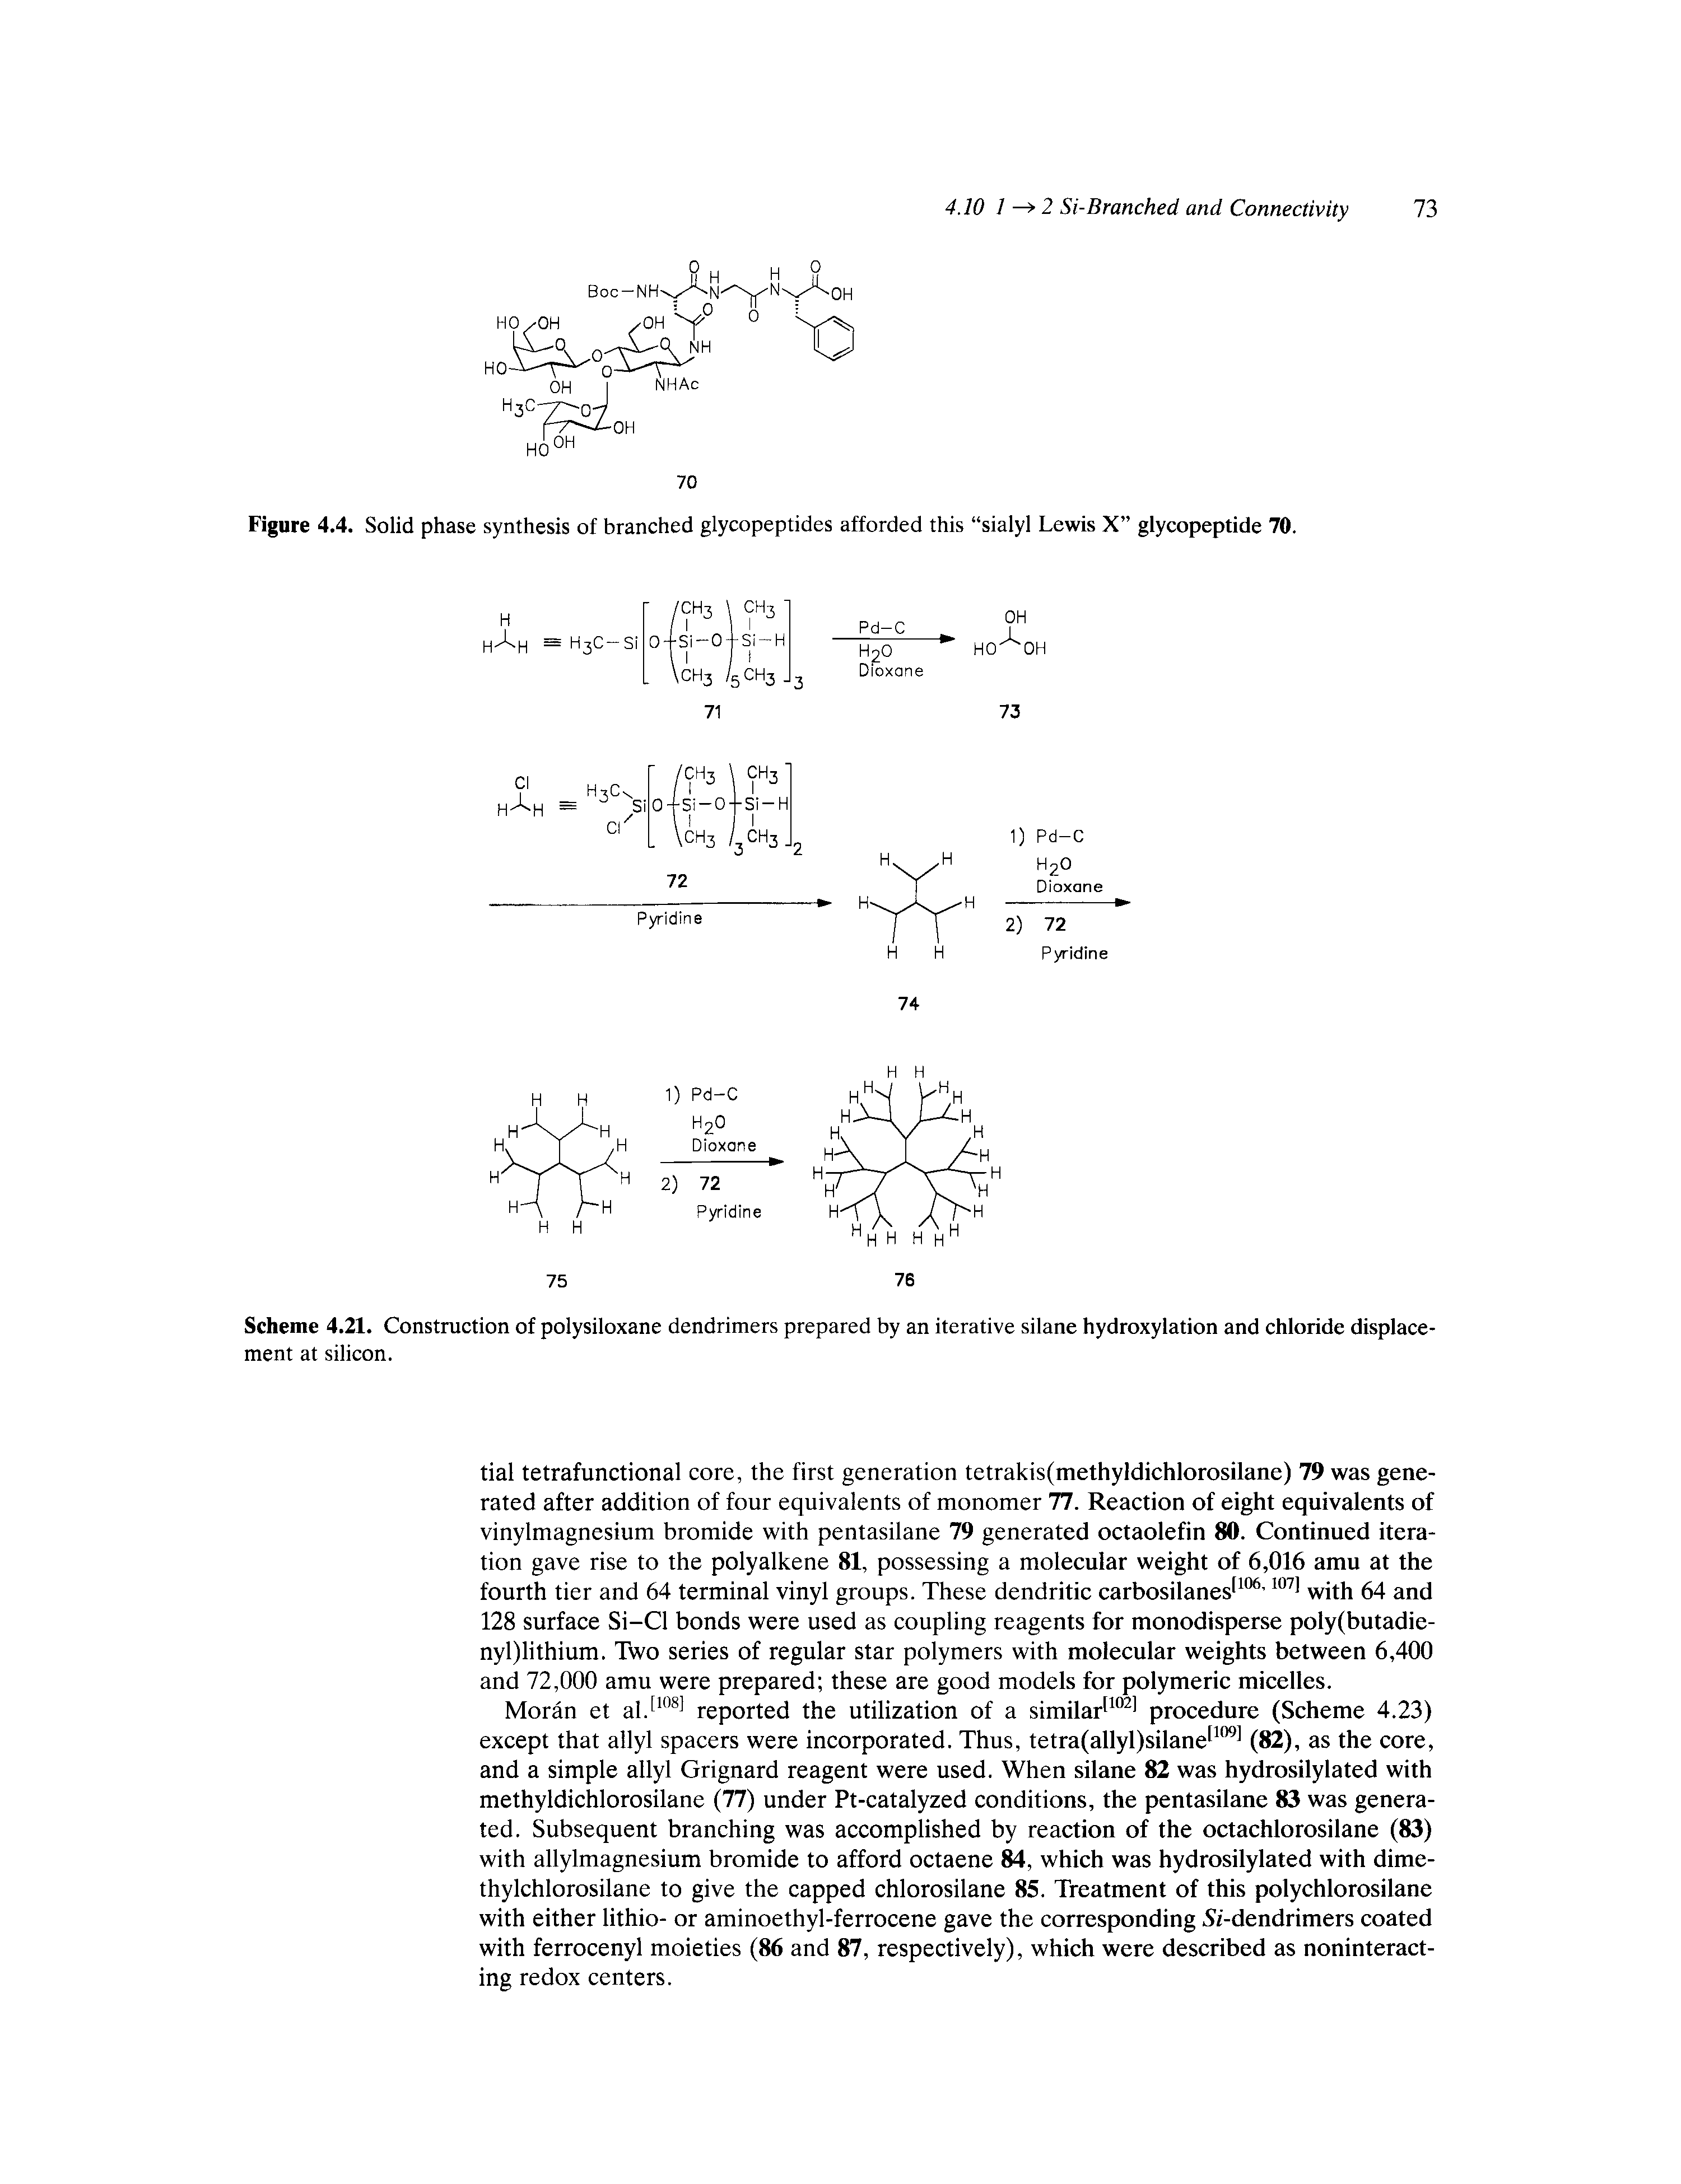 Scheme 4.21. Construction of polysiloxane dendrimers prepared by an iterative silane hydroxylation and chloride displacement at silicon.